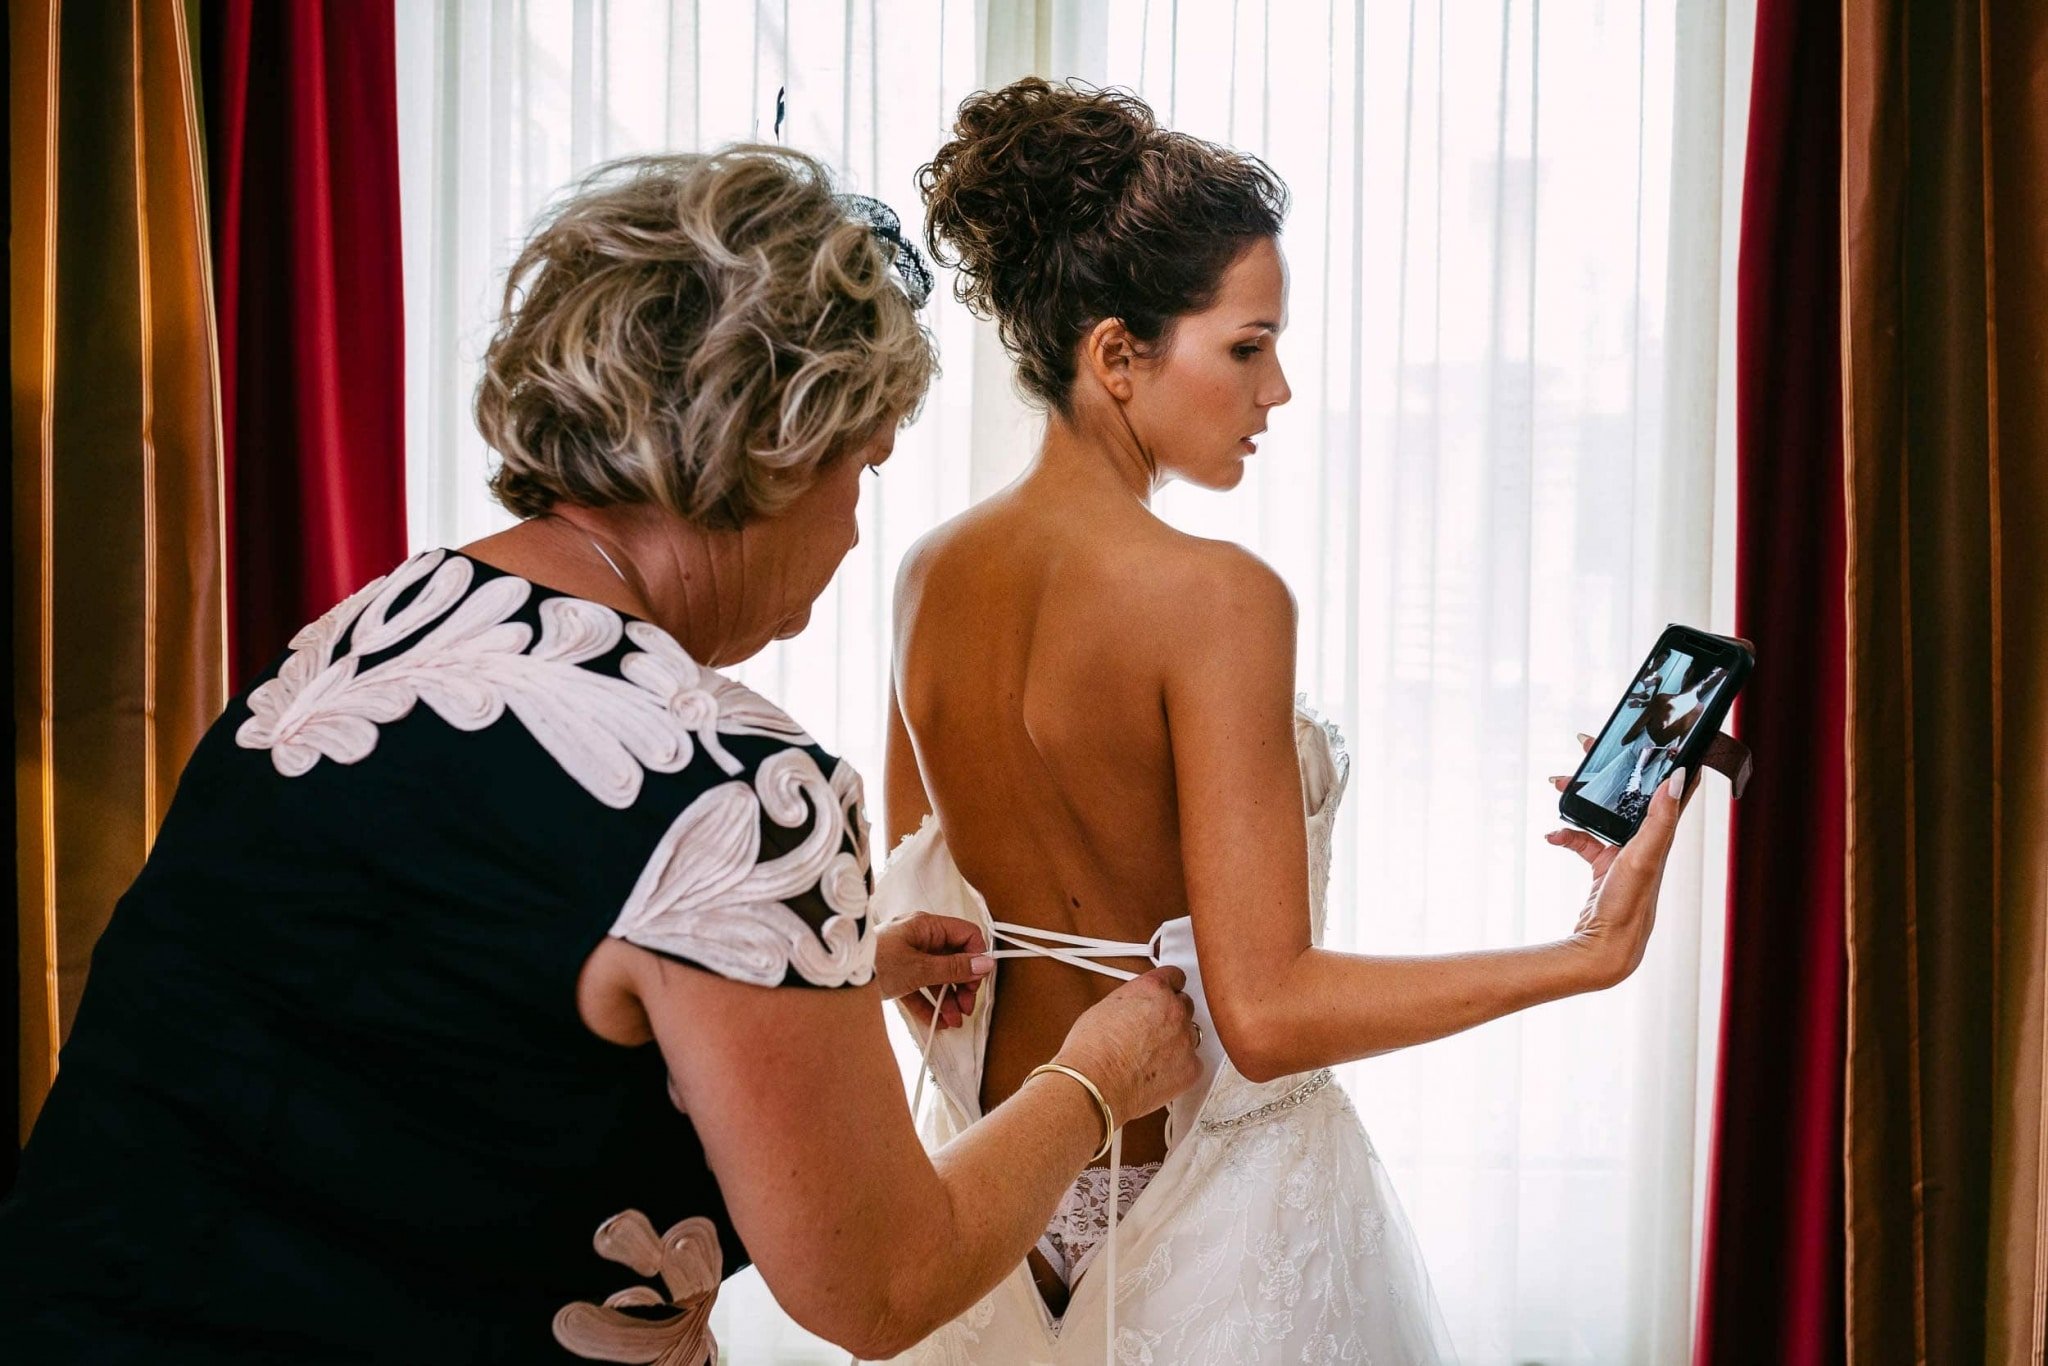 A woman puts on a wedding dress in front of a mirror.